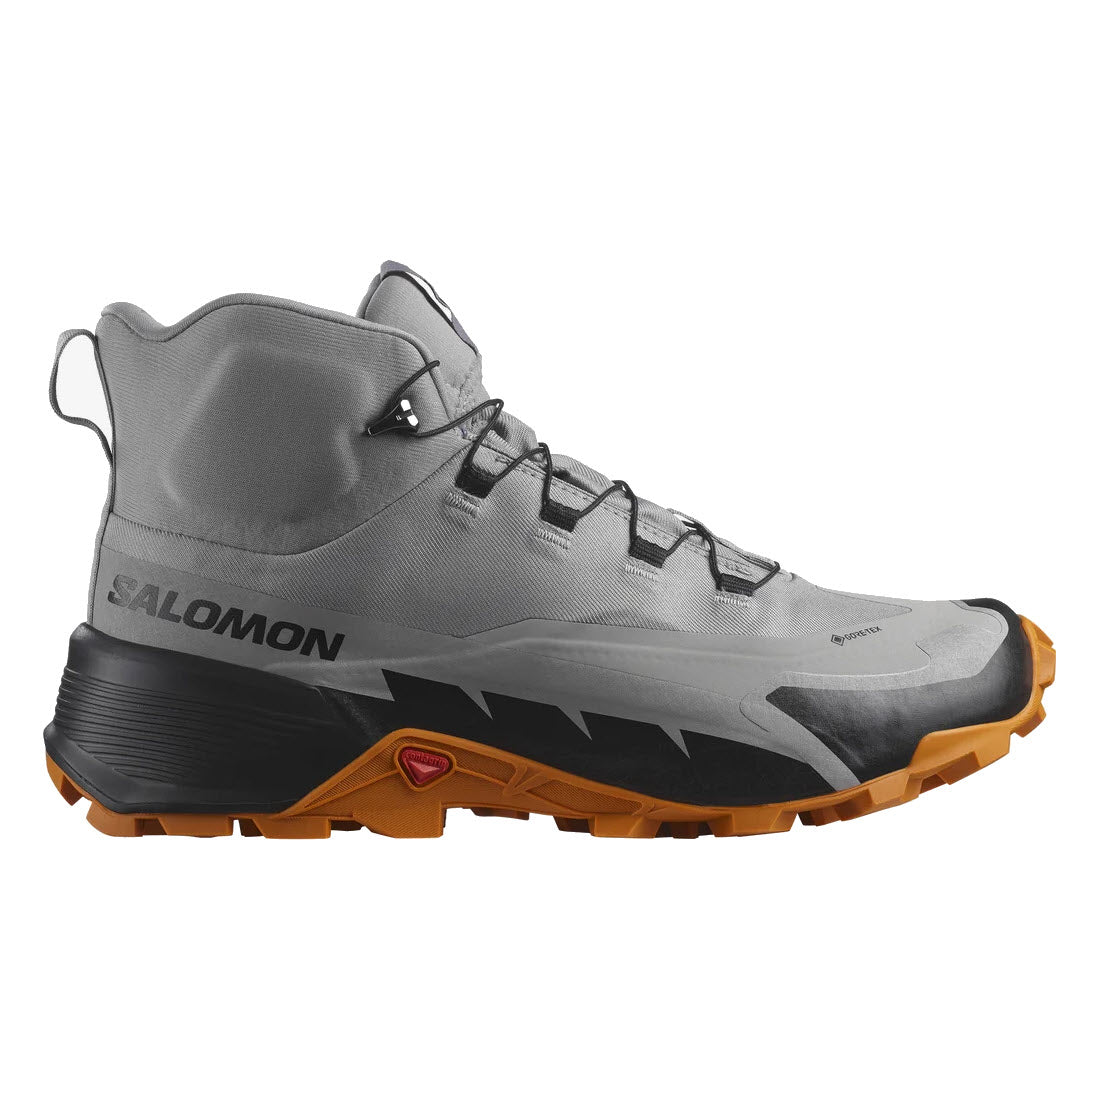 A gray and black Salomon Cross Hike 2 Mid GTX Gull/Marmalade hiking boot with a chunky sole and orange accents on a white background.